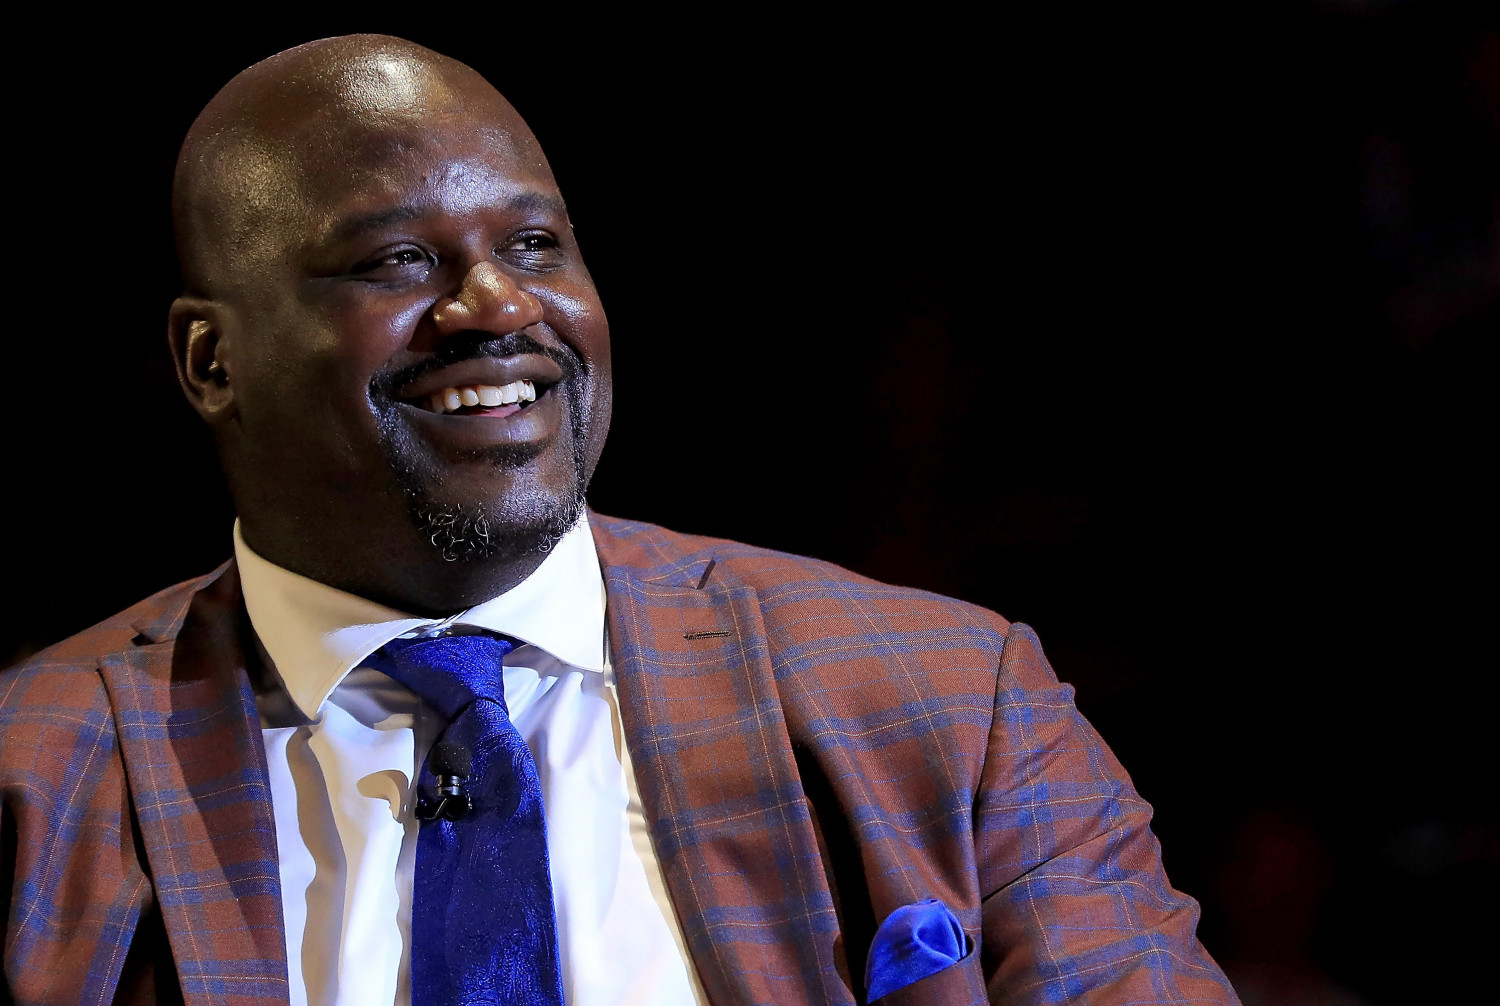 Shaq Buys Shoes for Teen With Size 18 Feet After Hearing His Mom Can’t Afford Them